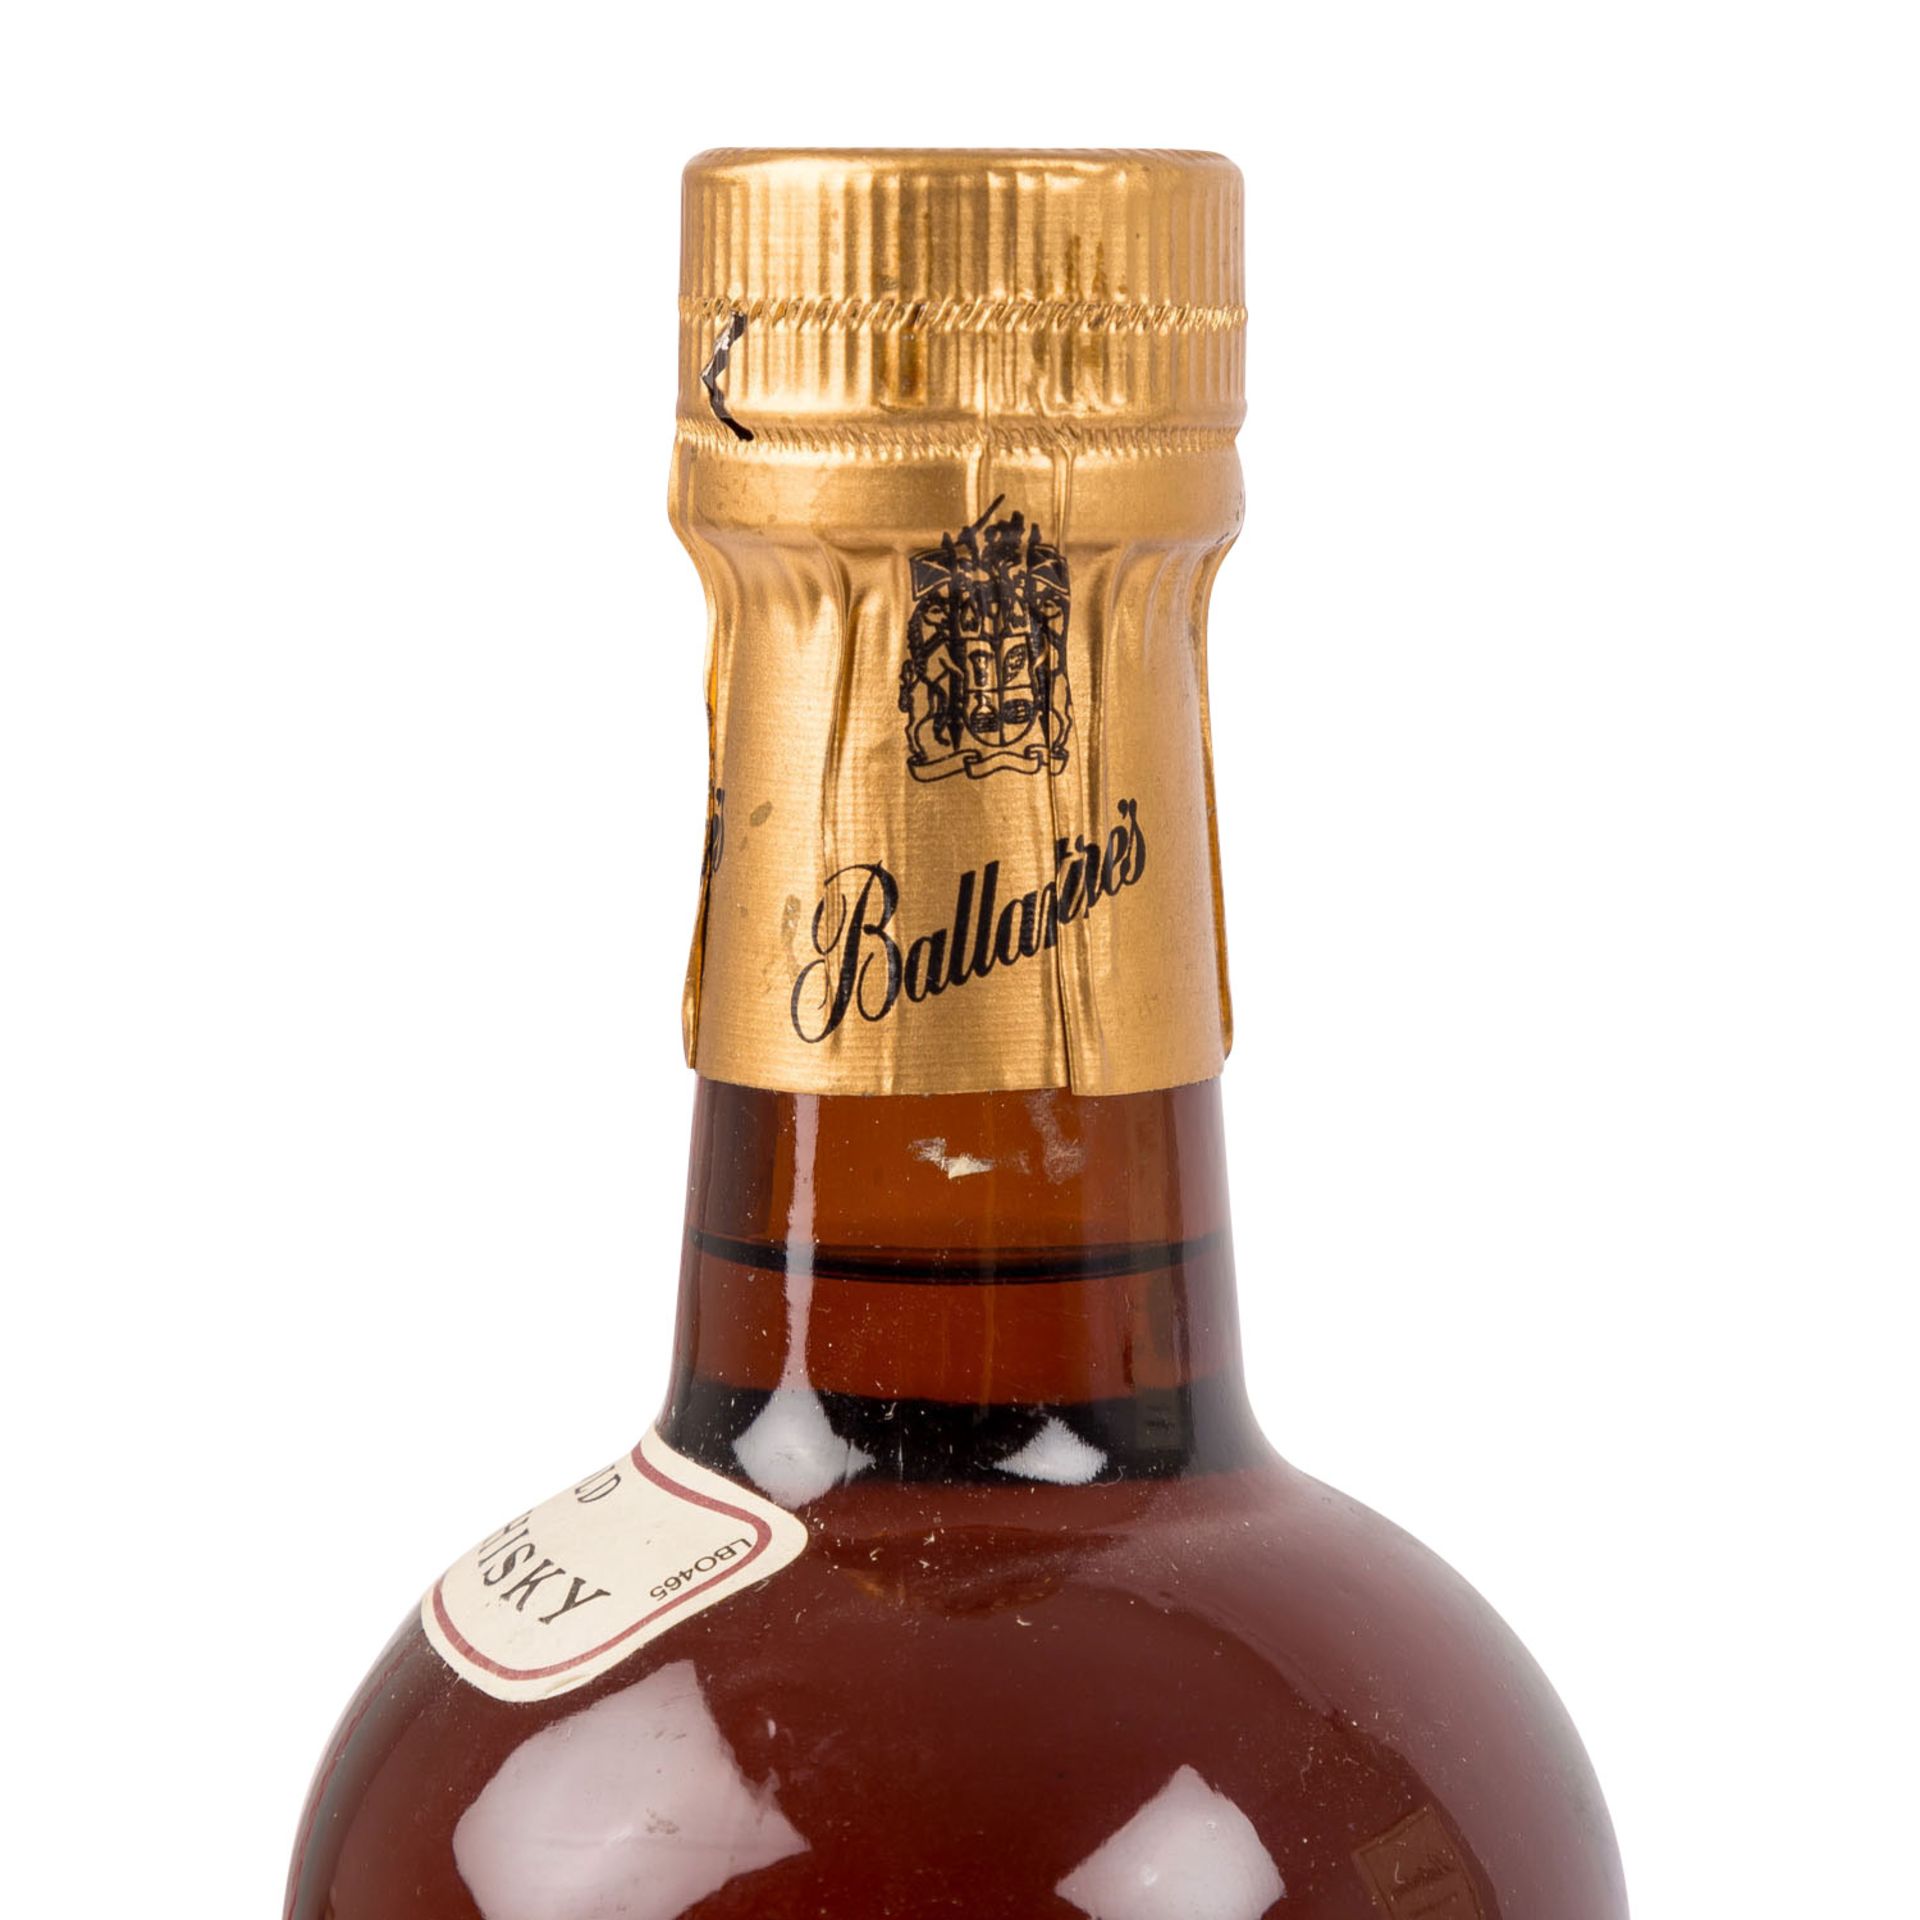 BALLANTINE'S blended 'very old' Scotch Whisky, 30 years - Image 3 of 3